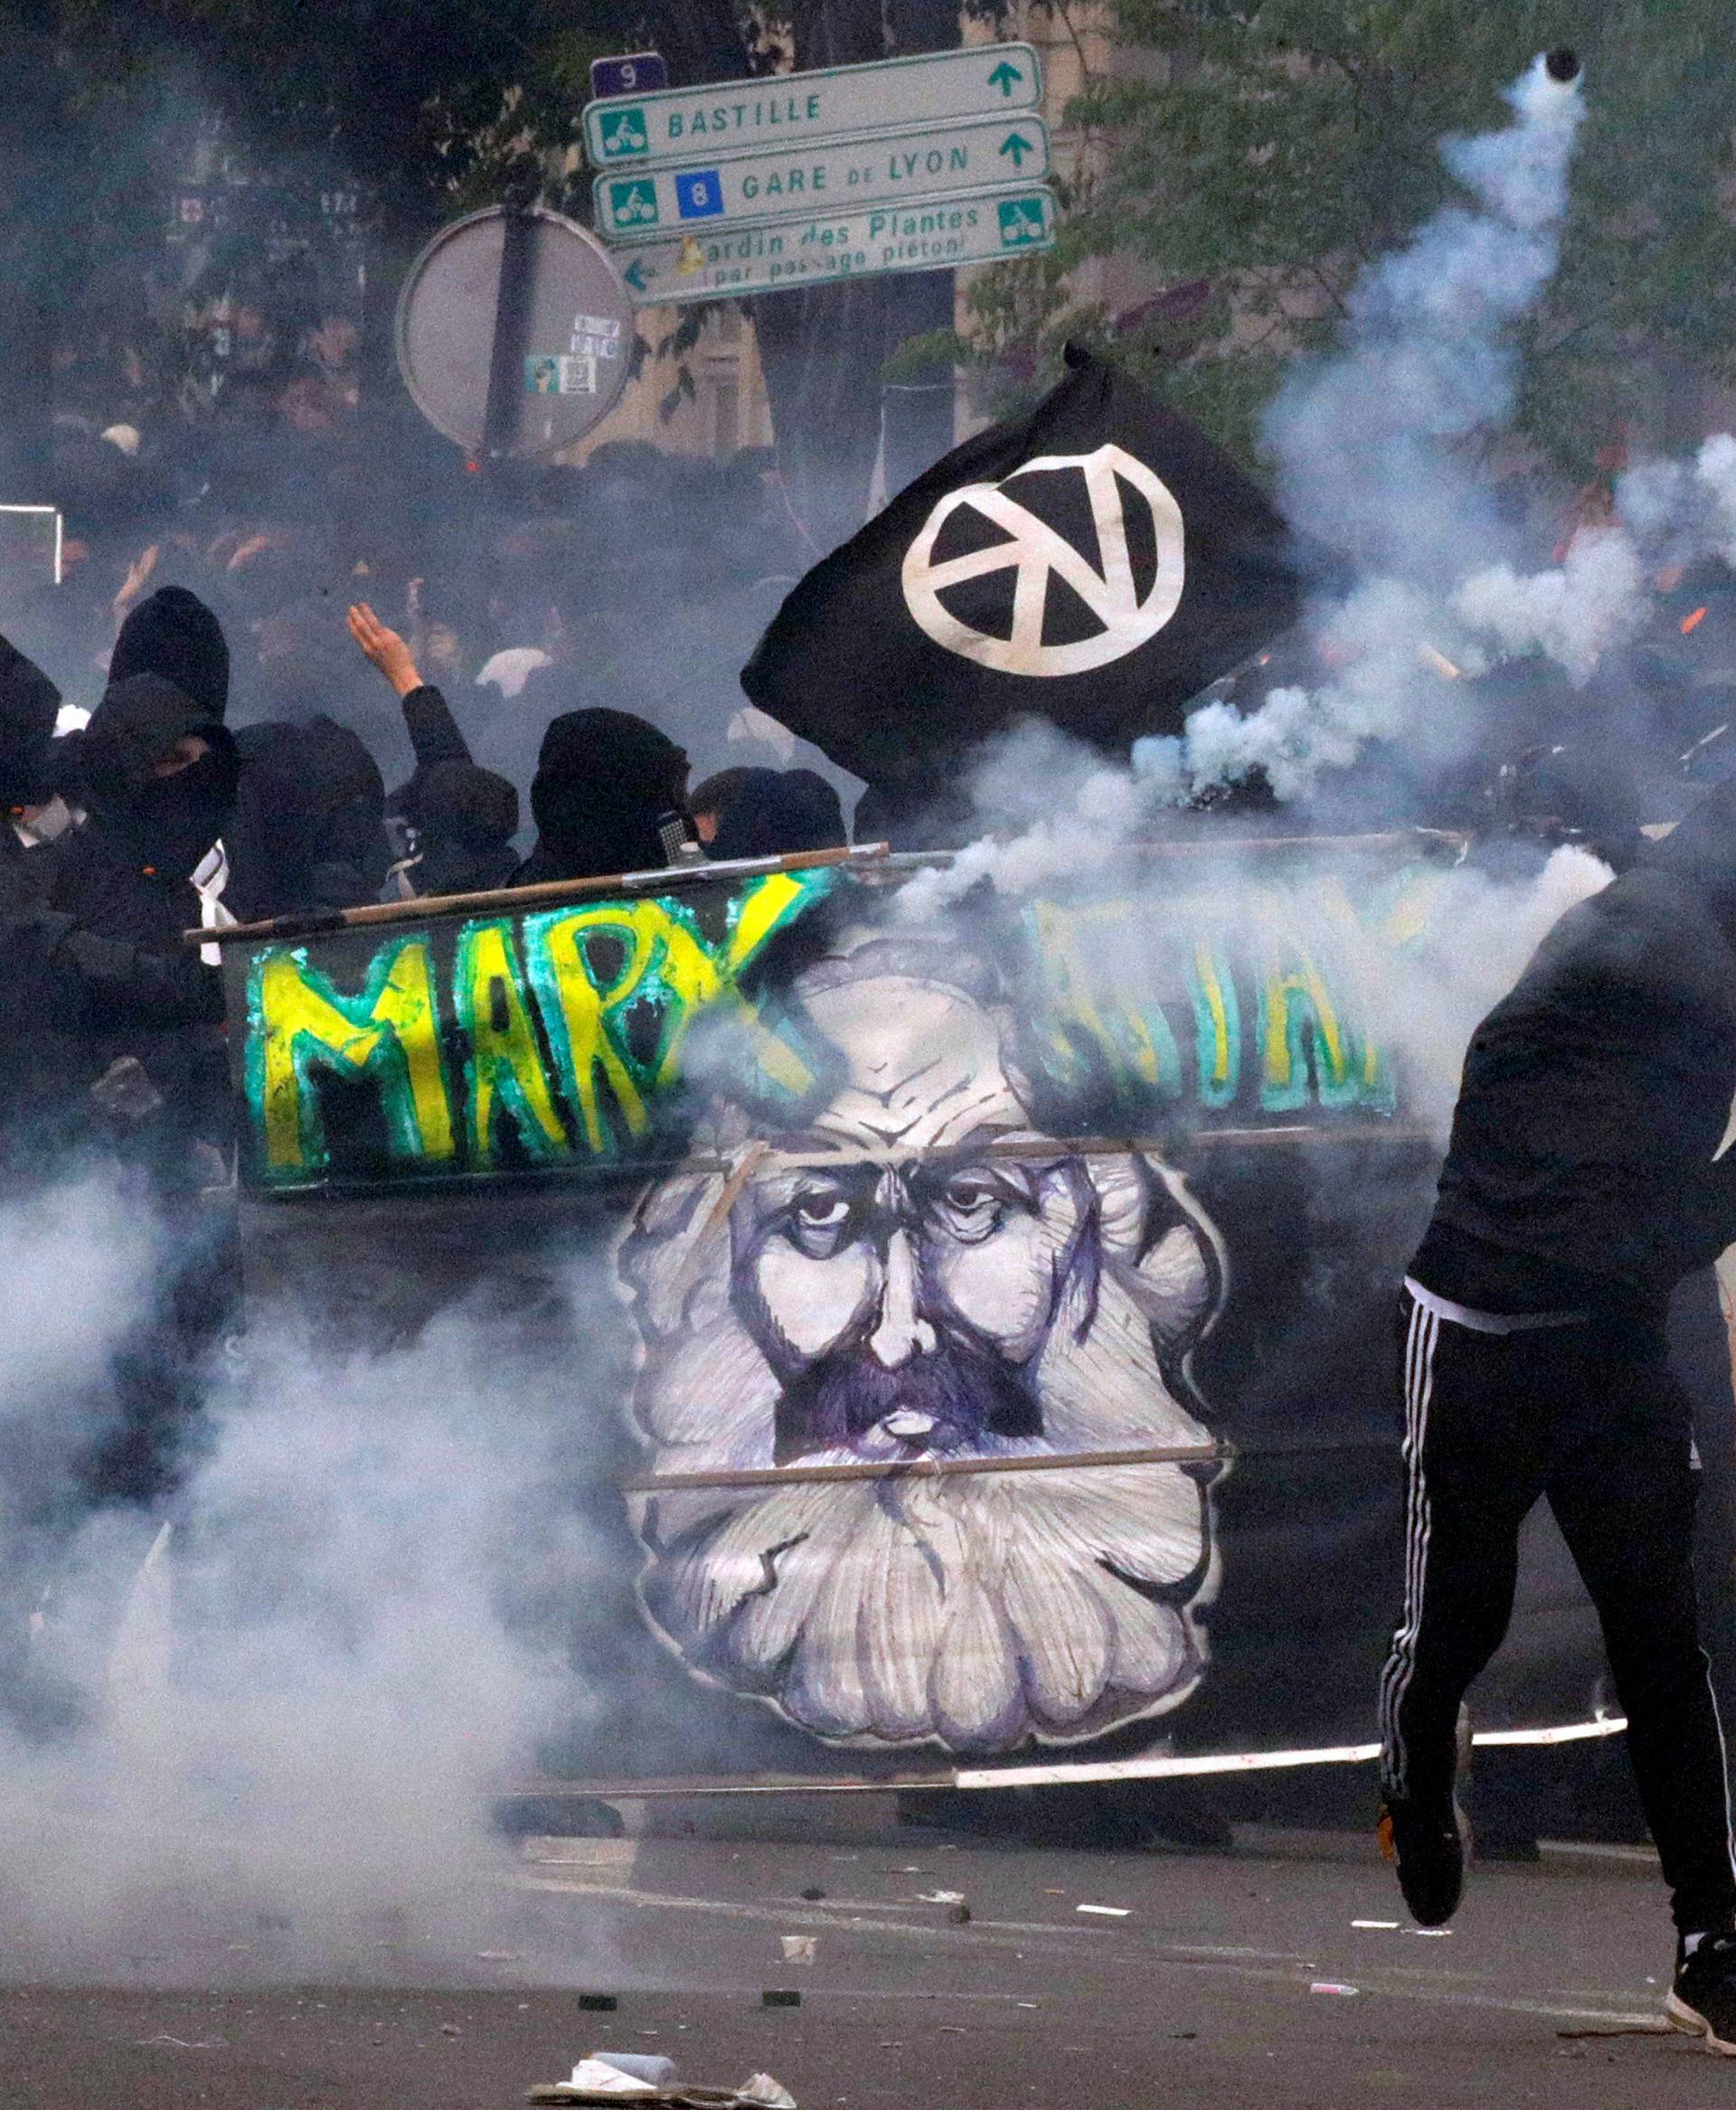 Tear gas floats around masked protesters during clashes with French CRS riot police at the May Day labour union rally in Paris